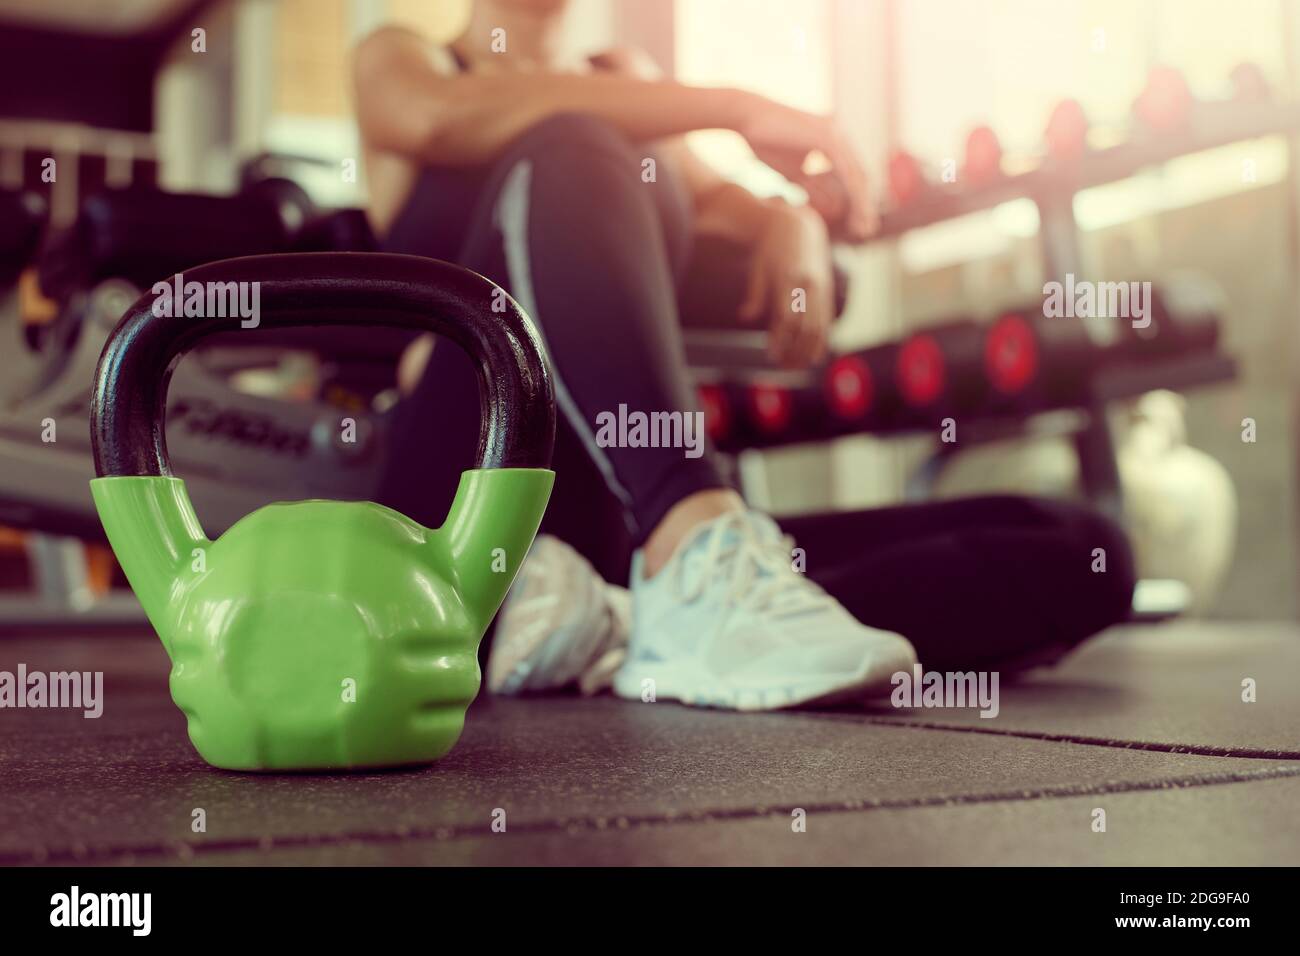 Woman exercise at gym fitness breaking relax after kettlebell workout or sitting tired. Concept fitness ,workout, gym exercise ,lifestyle and healthy. Stock Photo